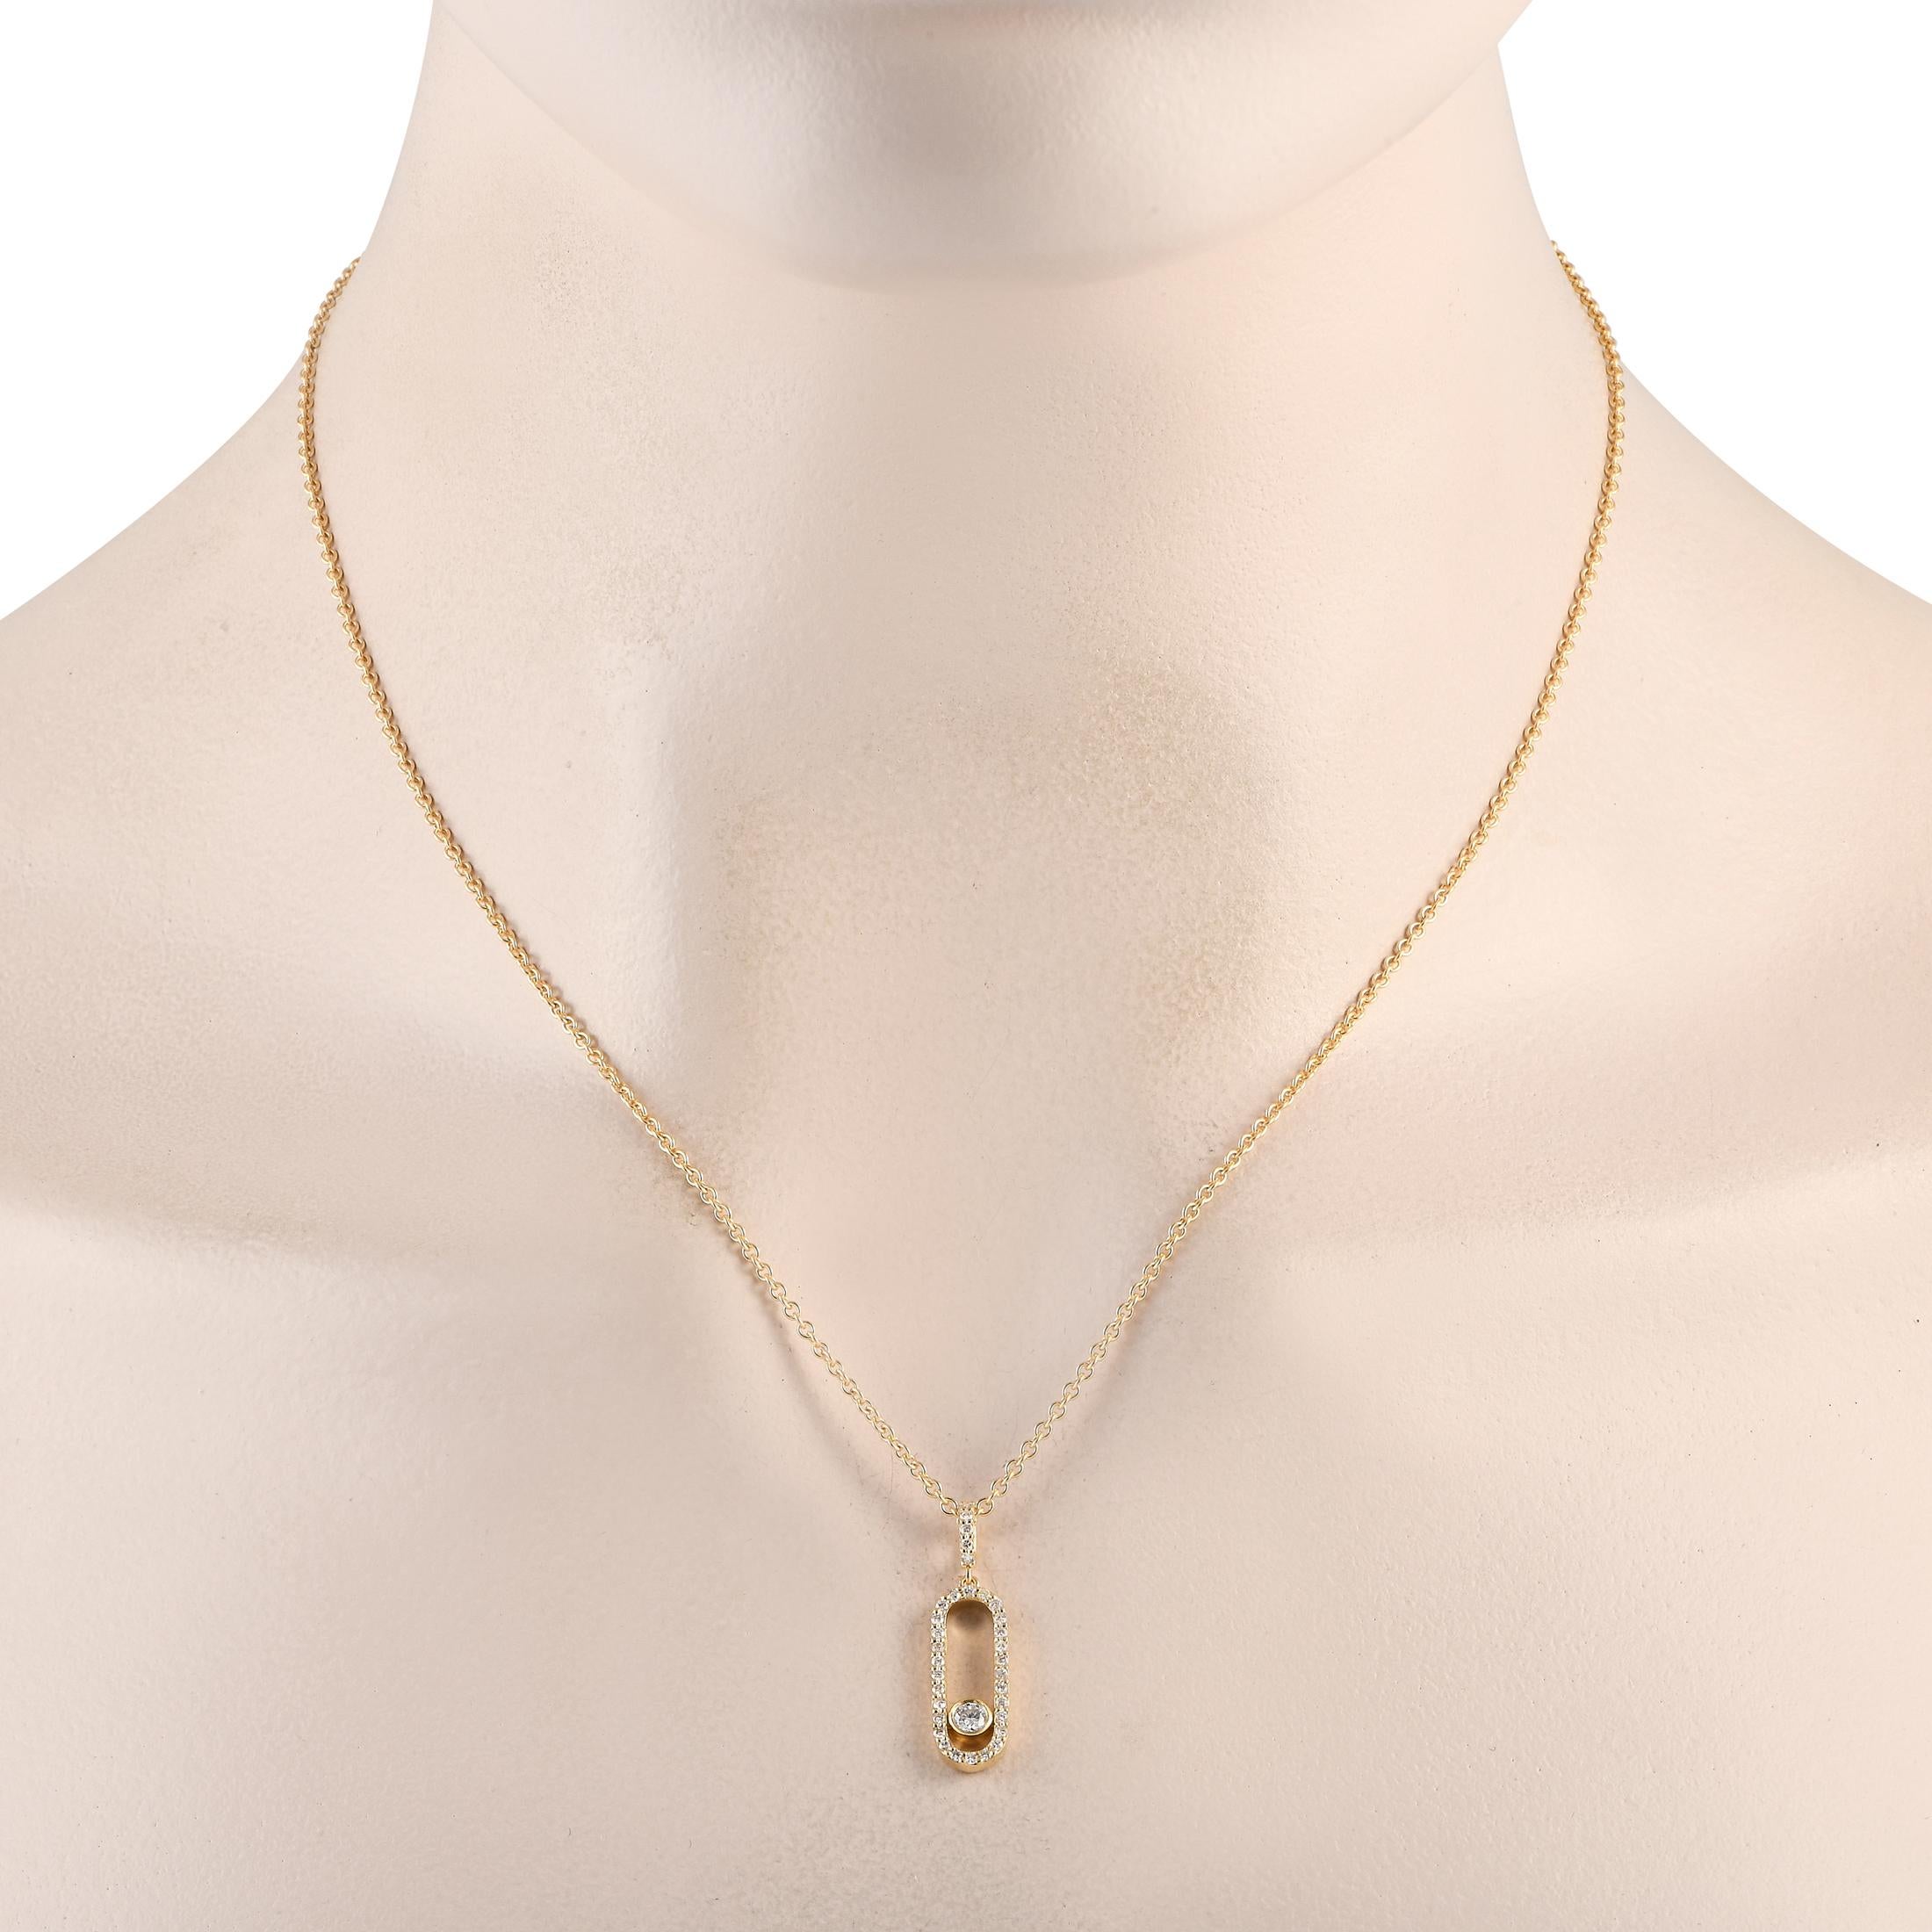 With a minimalist design, this paperclip necklace exudes understated elegance perfect for elevating your everyday basics. It features a thin necklace chain measuring 18 inches long and secured by a lobster clasp. The 1